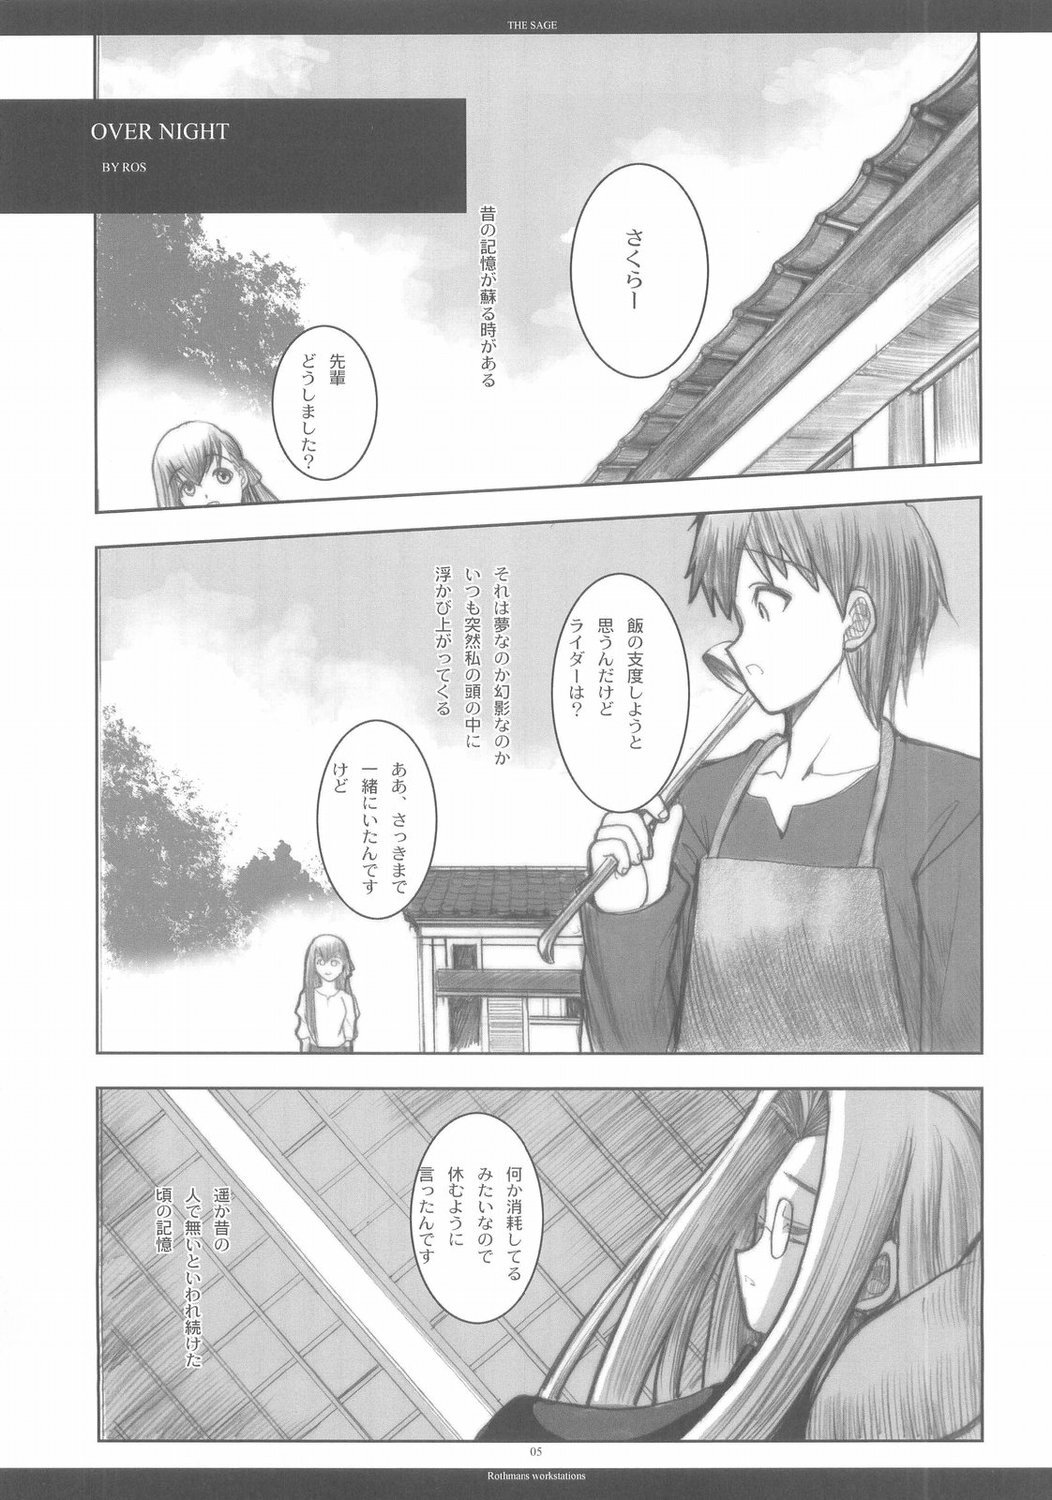 (CR37) [R-WORKS (ROS)] THE SAGE (Fate/stay night) page 4 full